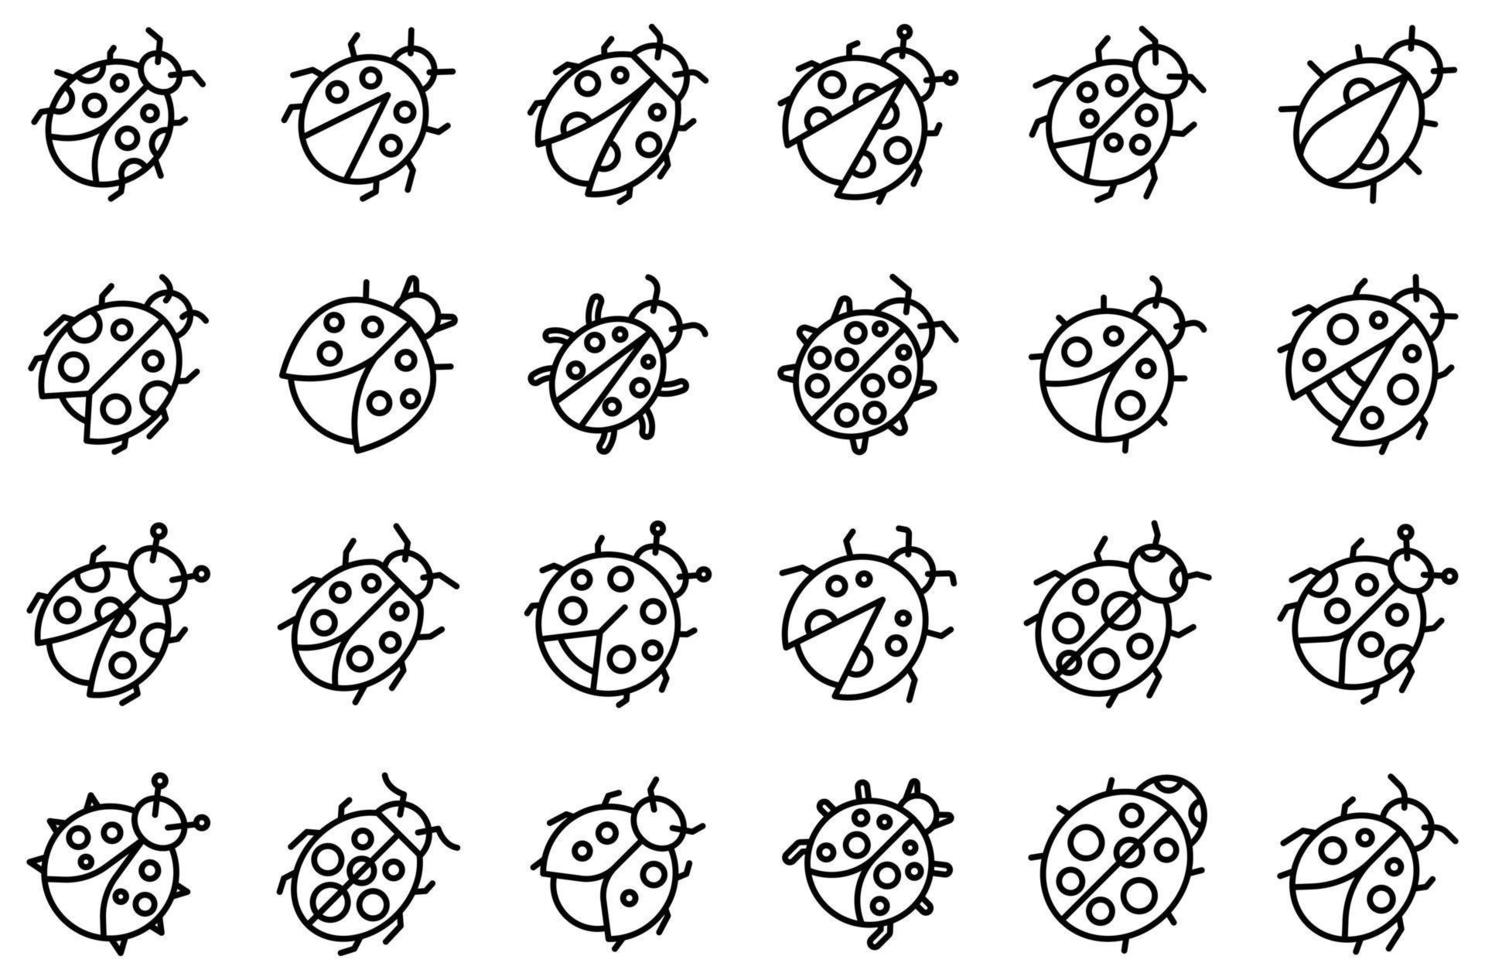 Insect ladybird icons set, outline style vector